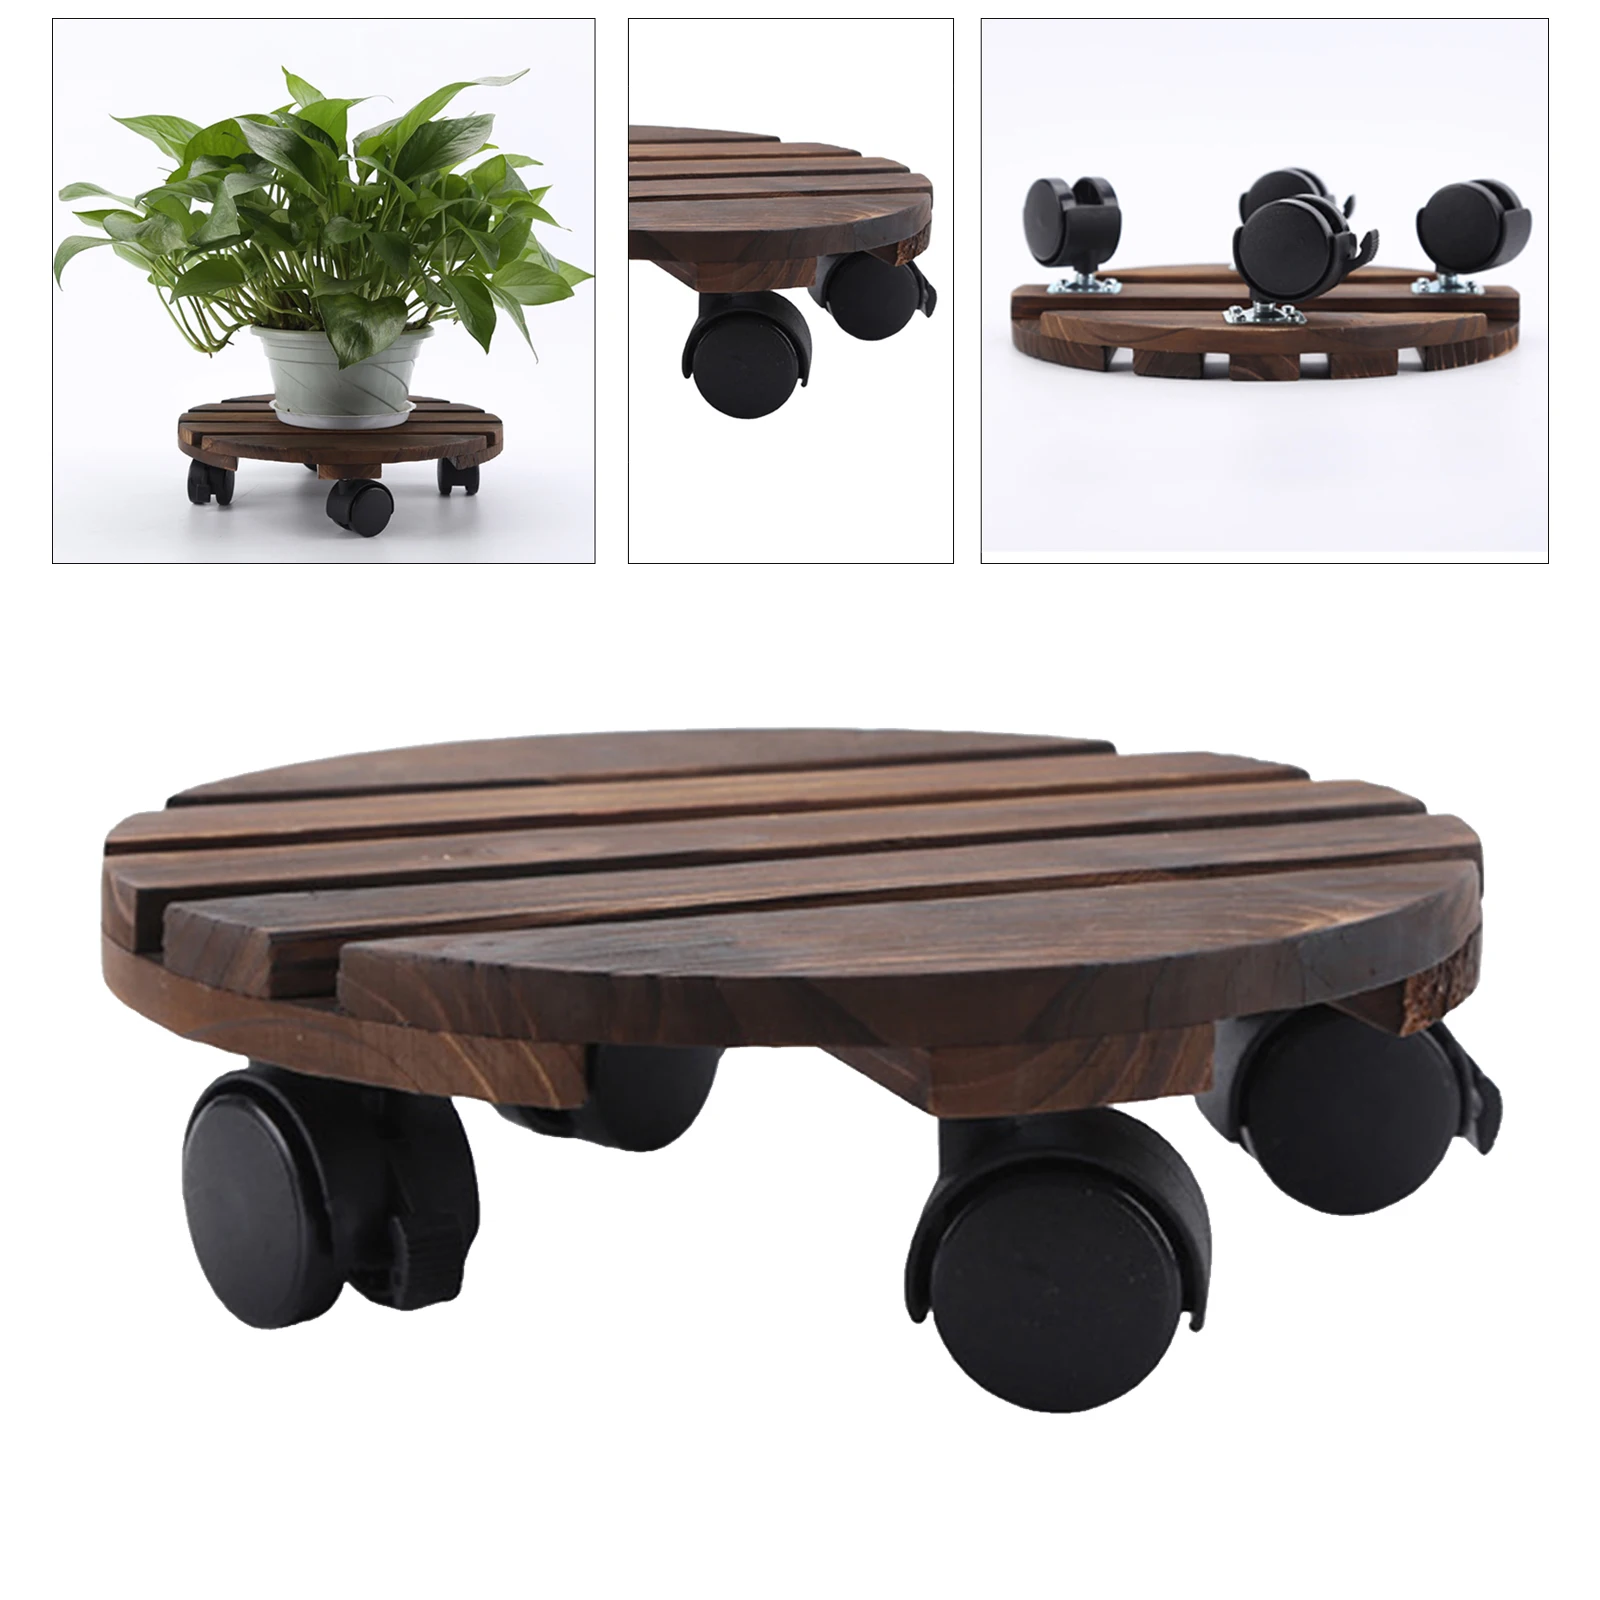 Plant Stand Caddy Planter Wooden Trolley Tray Mover 360 Degree Rotatable